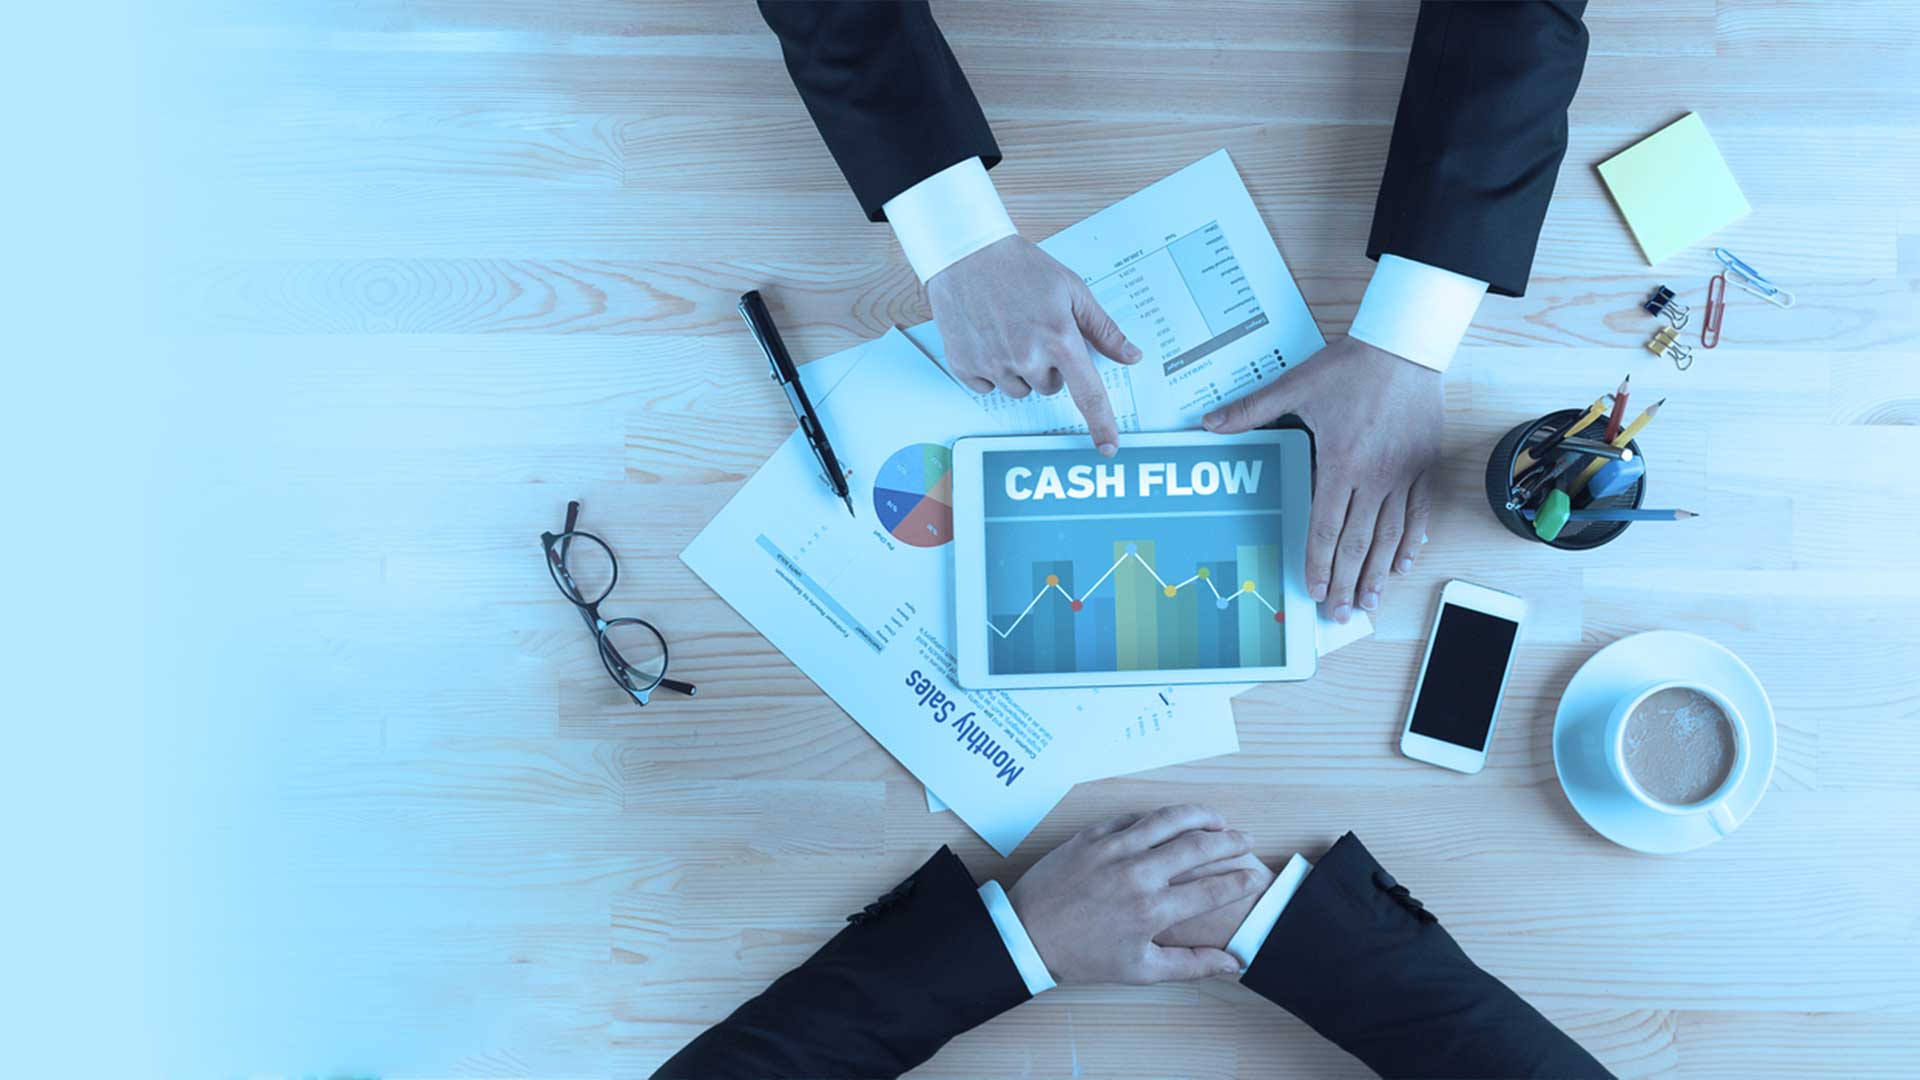 Cash Flow methods used to determine Business Valuation